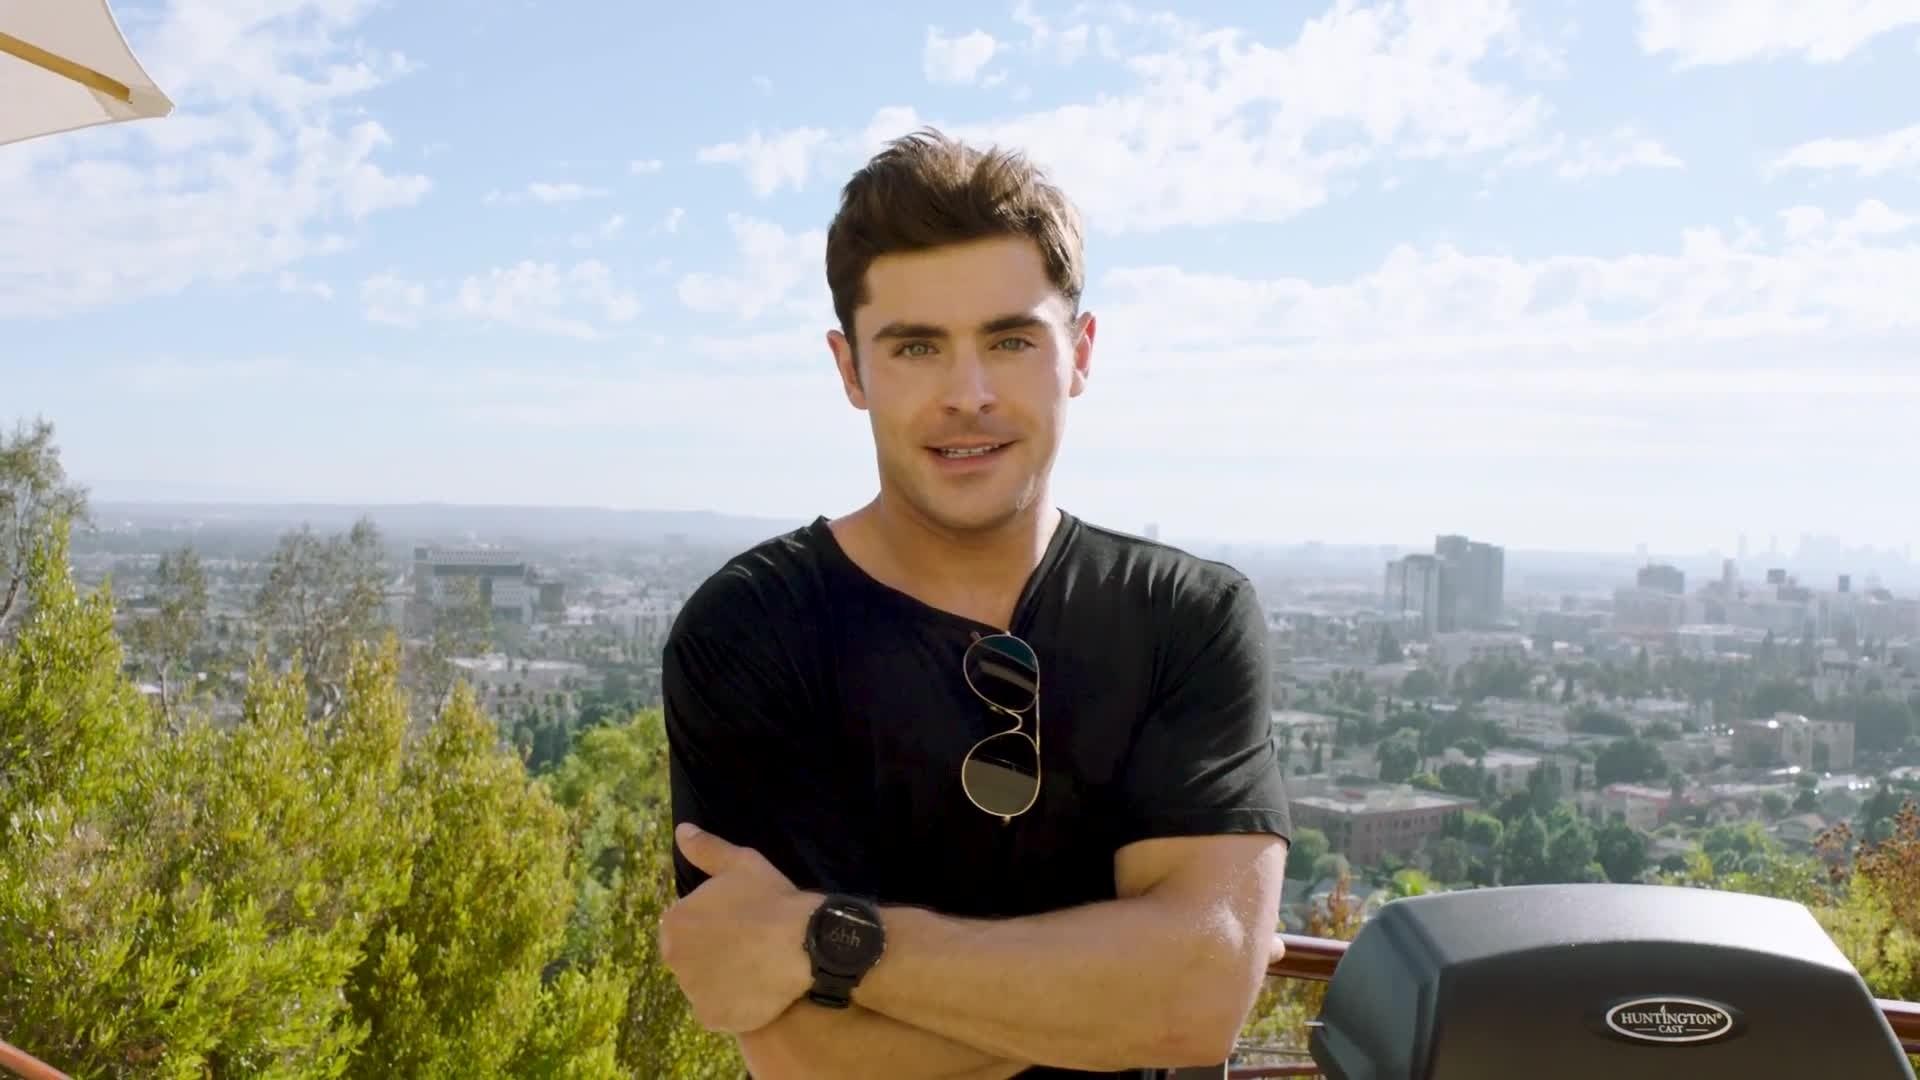 Questions With Zac Efron